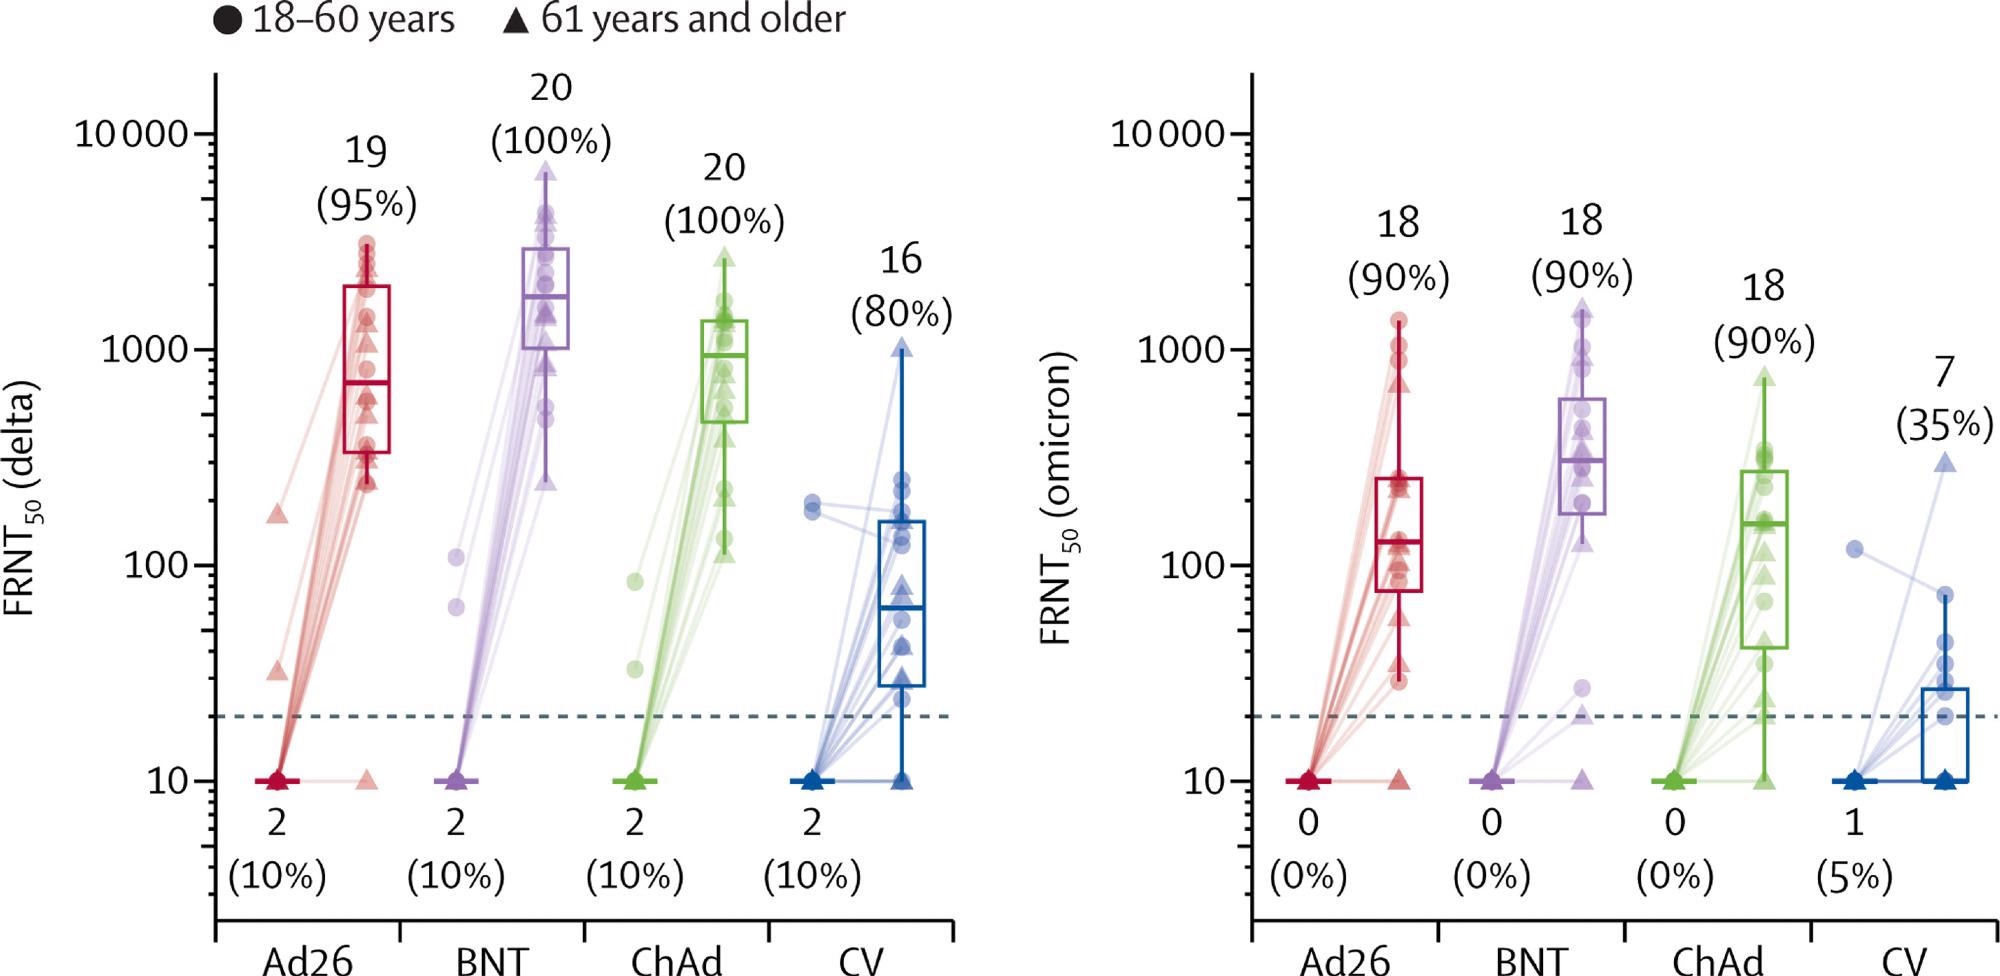 Live virus neutralization titers against delta and omicron variant strains, before and 28 days after boost vaccination by booster vaccine groups In each group, ten samples were selected from each age group (18–60 years, 61 years and older). Lines connect values from the same participant. The dotted line shows the lower limit of the assay. Values below the limit were substituted with a titer of 10. Participants with antibody titers above the lower limit are considered seropositive and are shown as percentages. The midlines of the boxes show medians and the outer bounds of the boxes show IQRs. Error bars extend to the last data point within 1·5 × the IQR above or below the 75th or 25th percentile. See appendix (p 14) for summary statistics.